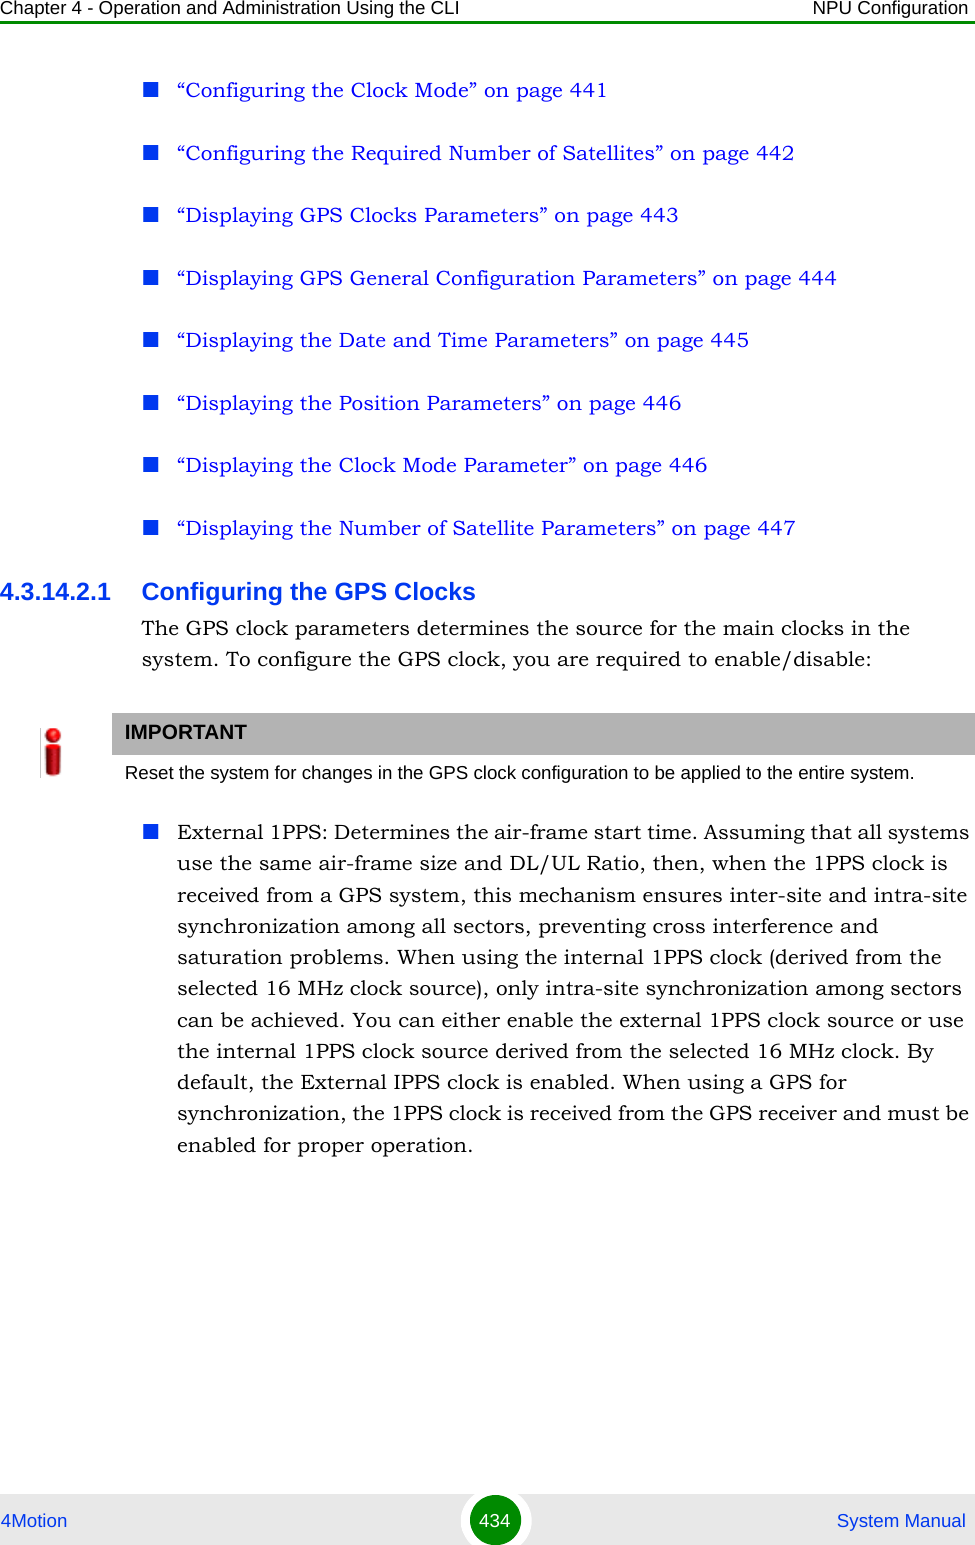 Chapter 4 - Operation and Administration Using the CLI NPU Configuration4Motion 434  System Manual“Configuring the Clock Mode” on page 441“Configuring the Required Number of Satellites” on page 442“Displaying GPS Clocks Parameters” on page 443“Displaying GPS General Configuration Parameters” on page 444“Displaying the Date and Time Parameters” on page 445“Displaying the Position Parameters” on page 446“Displaying the Clock Mode Parameter” on page 446“Displaying the Number of Satellite Parameters” on page 4474.3.14.2.1 Configuring the GPS ClocksThe GPS clock parameters determines the source for the main clocks in the system. To configure the GPS clock, you are required to enable/disable:External 1PPS: Determines the air-frame start time. Assuming that all systems use the same air-frame size and DL/UL Ratio, then, when the 1PPS clock is received from a GPS system, this mechanism ensures inter-site and intra-site synchronization among all sectors, preventing cross interference and saturation problems. When using the internal 1PPS clock (derived from the selected 16 MHz clock source), only intra-site synchronization among sectors can be achieved. You can either enable the external 1PPS clock source or use the internal 1PPS clock source derived from the selected 16 MHz clock. By default, the External IPPS clock is enabled. When using a GPS for synchronization, the 1PPS clock is received from the GPS receiver and must be enabled for proper operation.IMPORTANTReset the system for changes in the GPS clock configuration to be applied to the entire system.